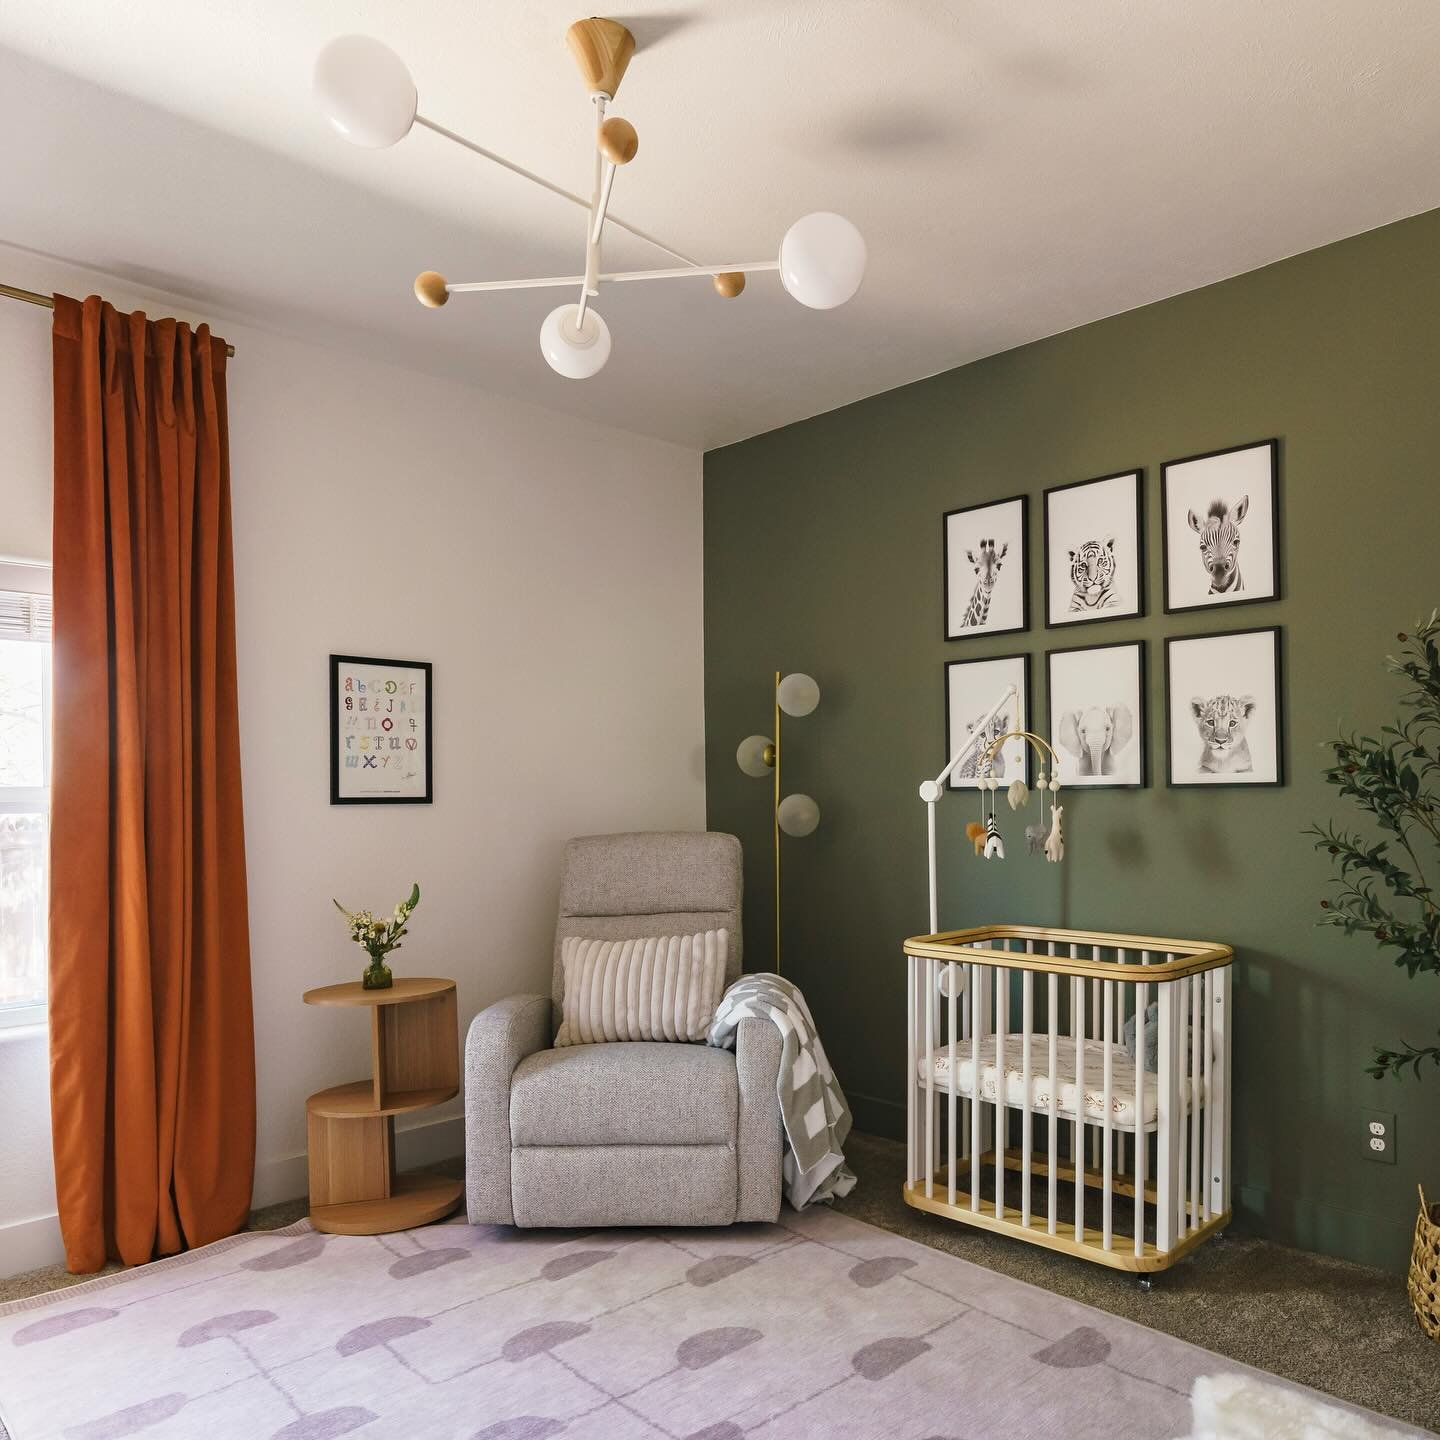 would you believe us if we told you this was the same room?? swipe to see the before pics of one of our favorite rooms in the #LowellProject 

📷: @nathanial.clark 

#InteriorDesignIdeas #BabyRoomIdeas #BabyRoomDecor #NurseryDesign #ElevatedDesign #N